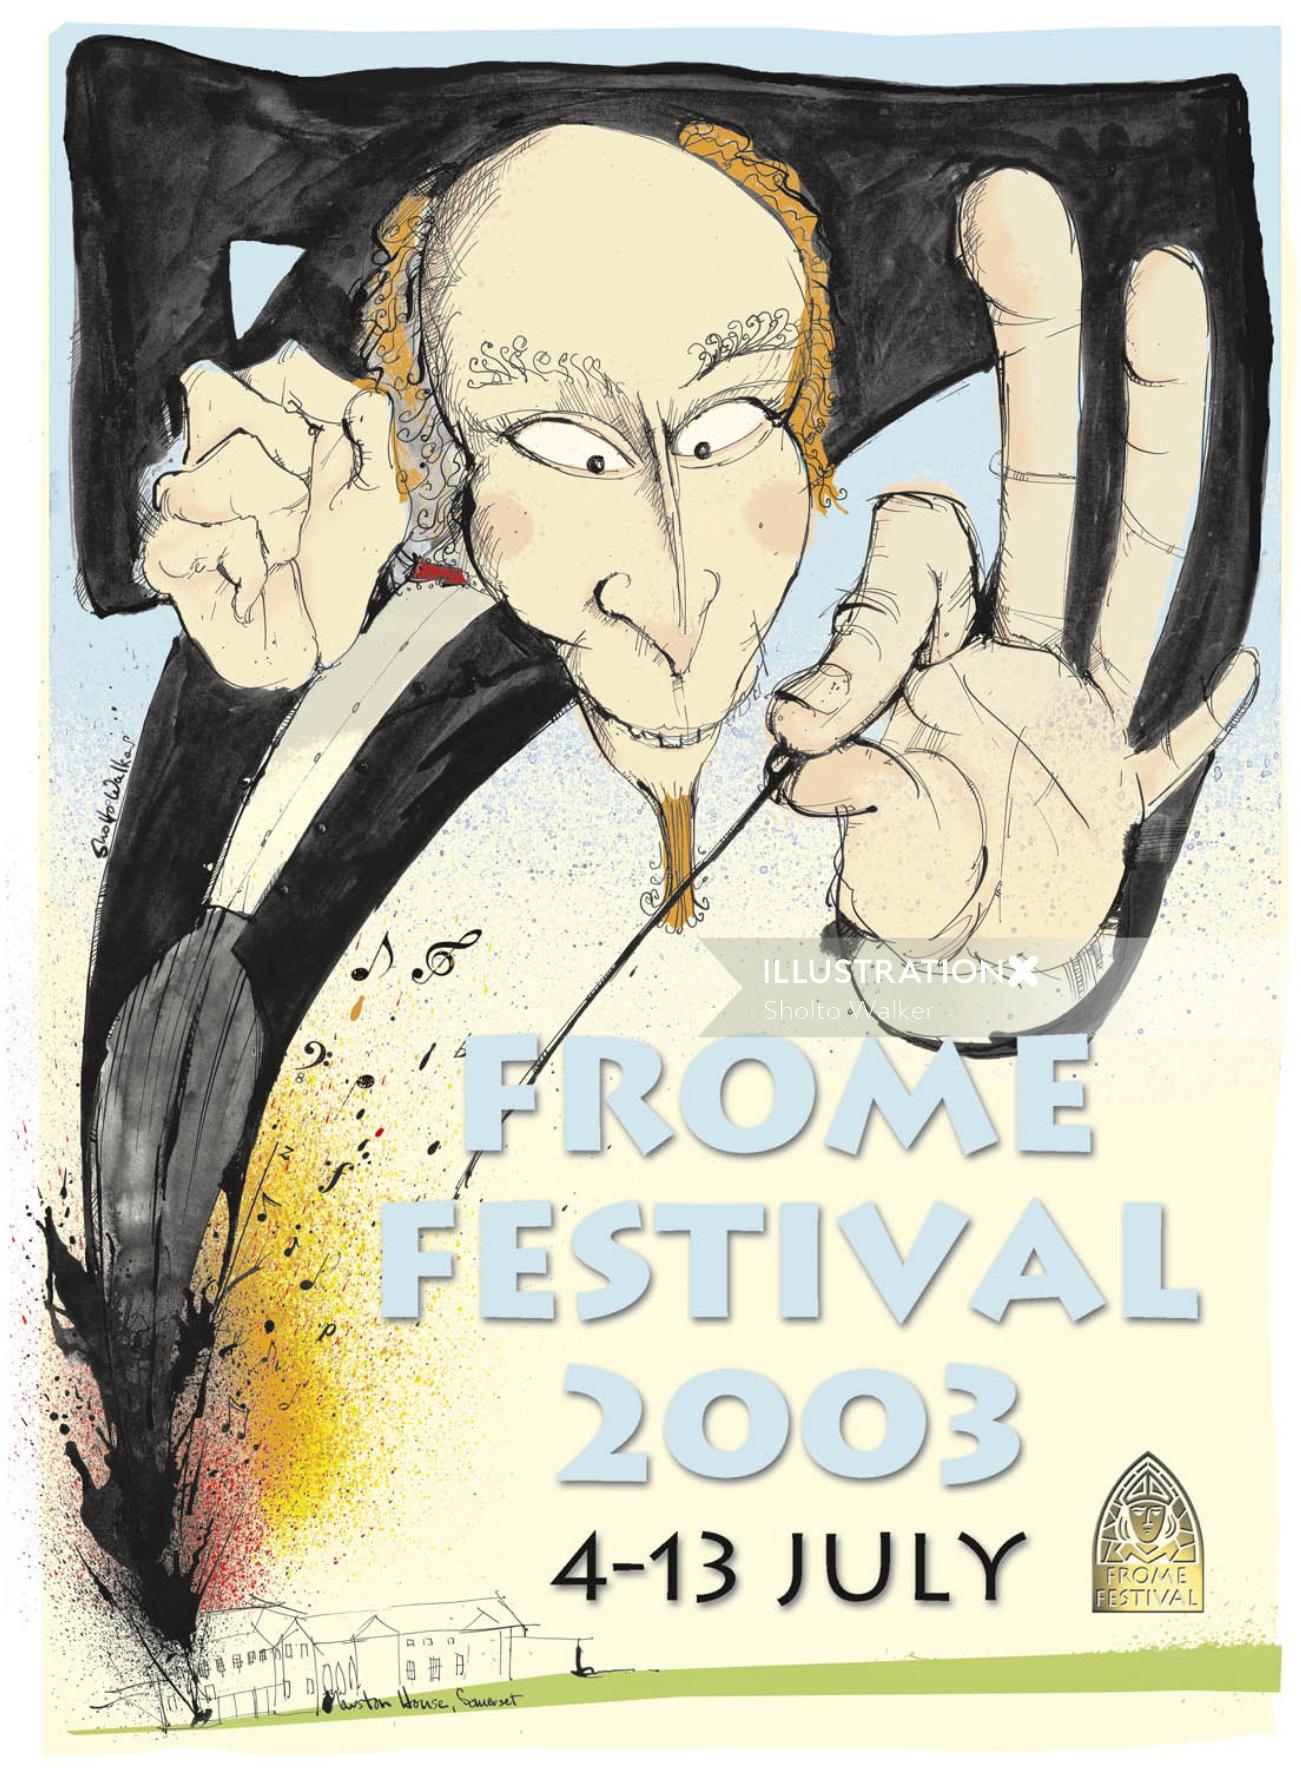 Conceptual From festival 2003 cover
